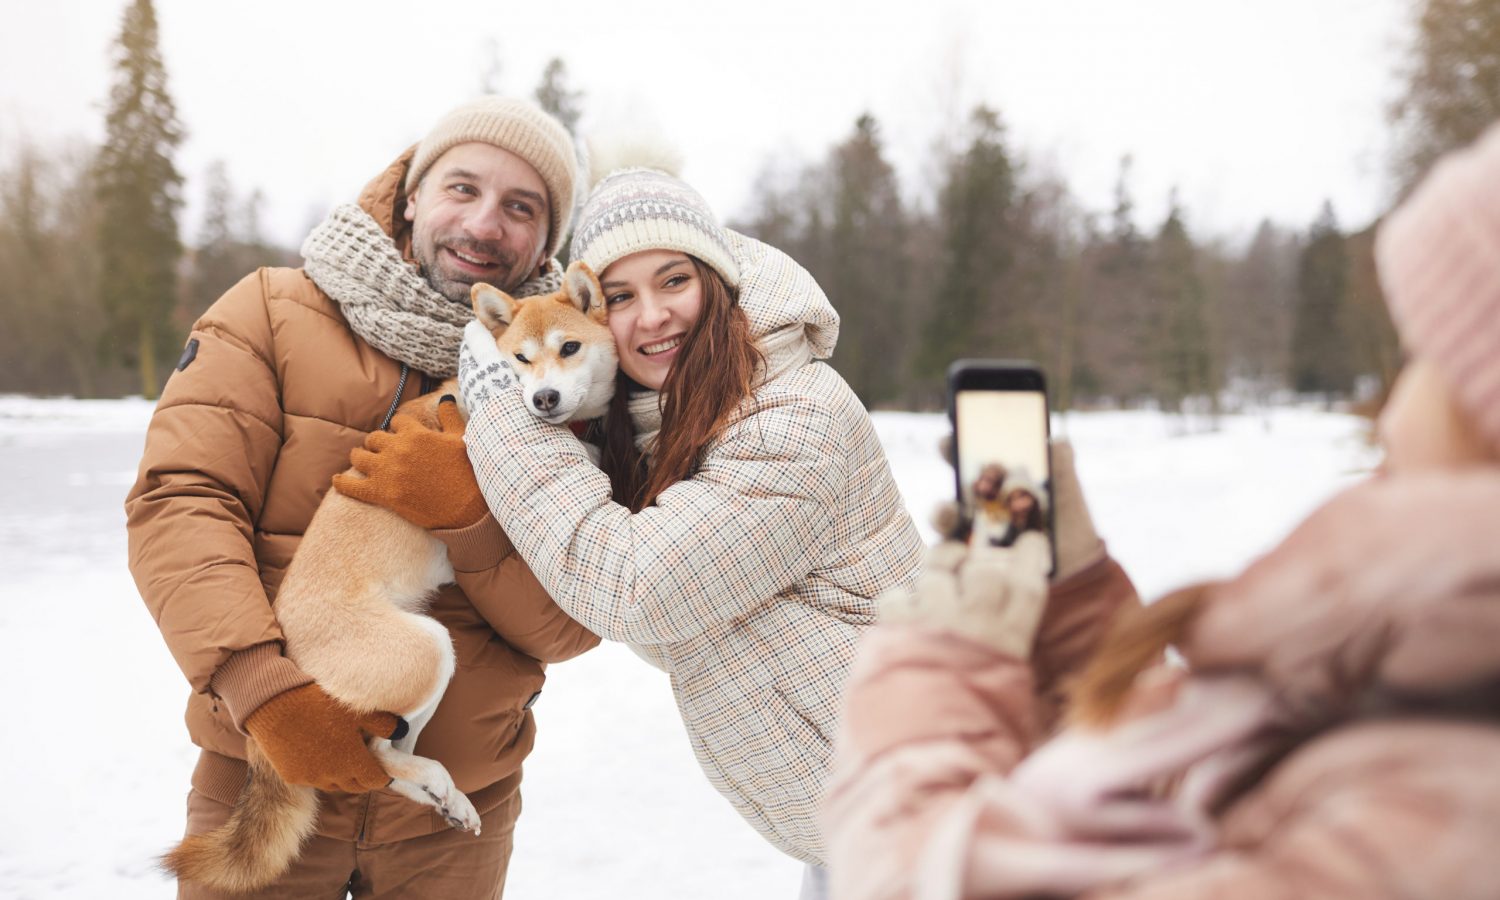 Teenage girl taking photo of parents while enjoying walk outdoors together in winter forest, focus on happy adult couple holding dog